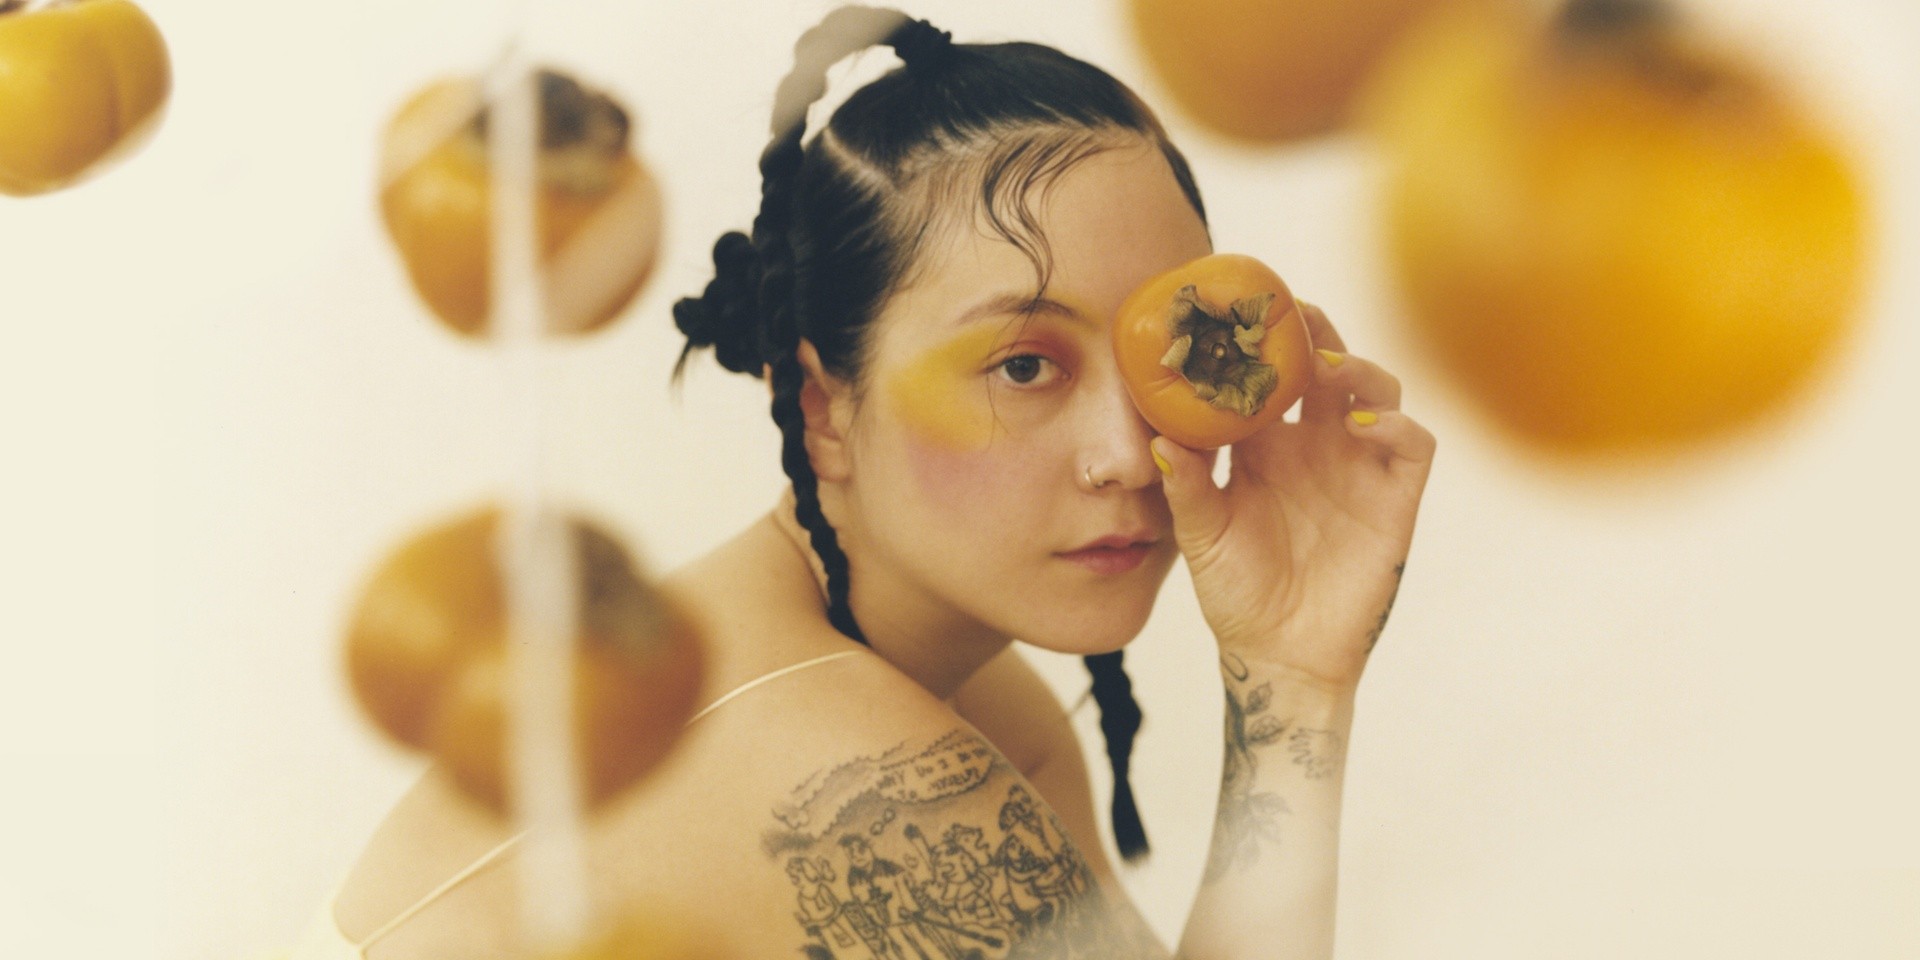 Japanese Breakfast previews forthcoming album 'Jubilee' with new single, 'Be Sweet' - listen